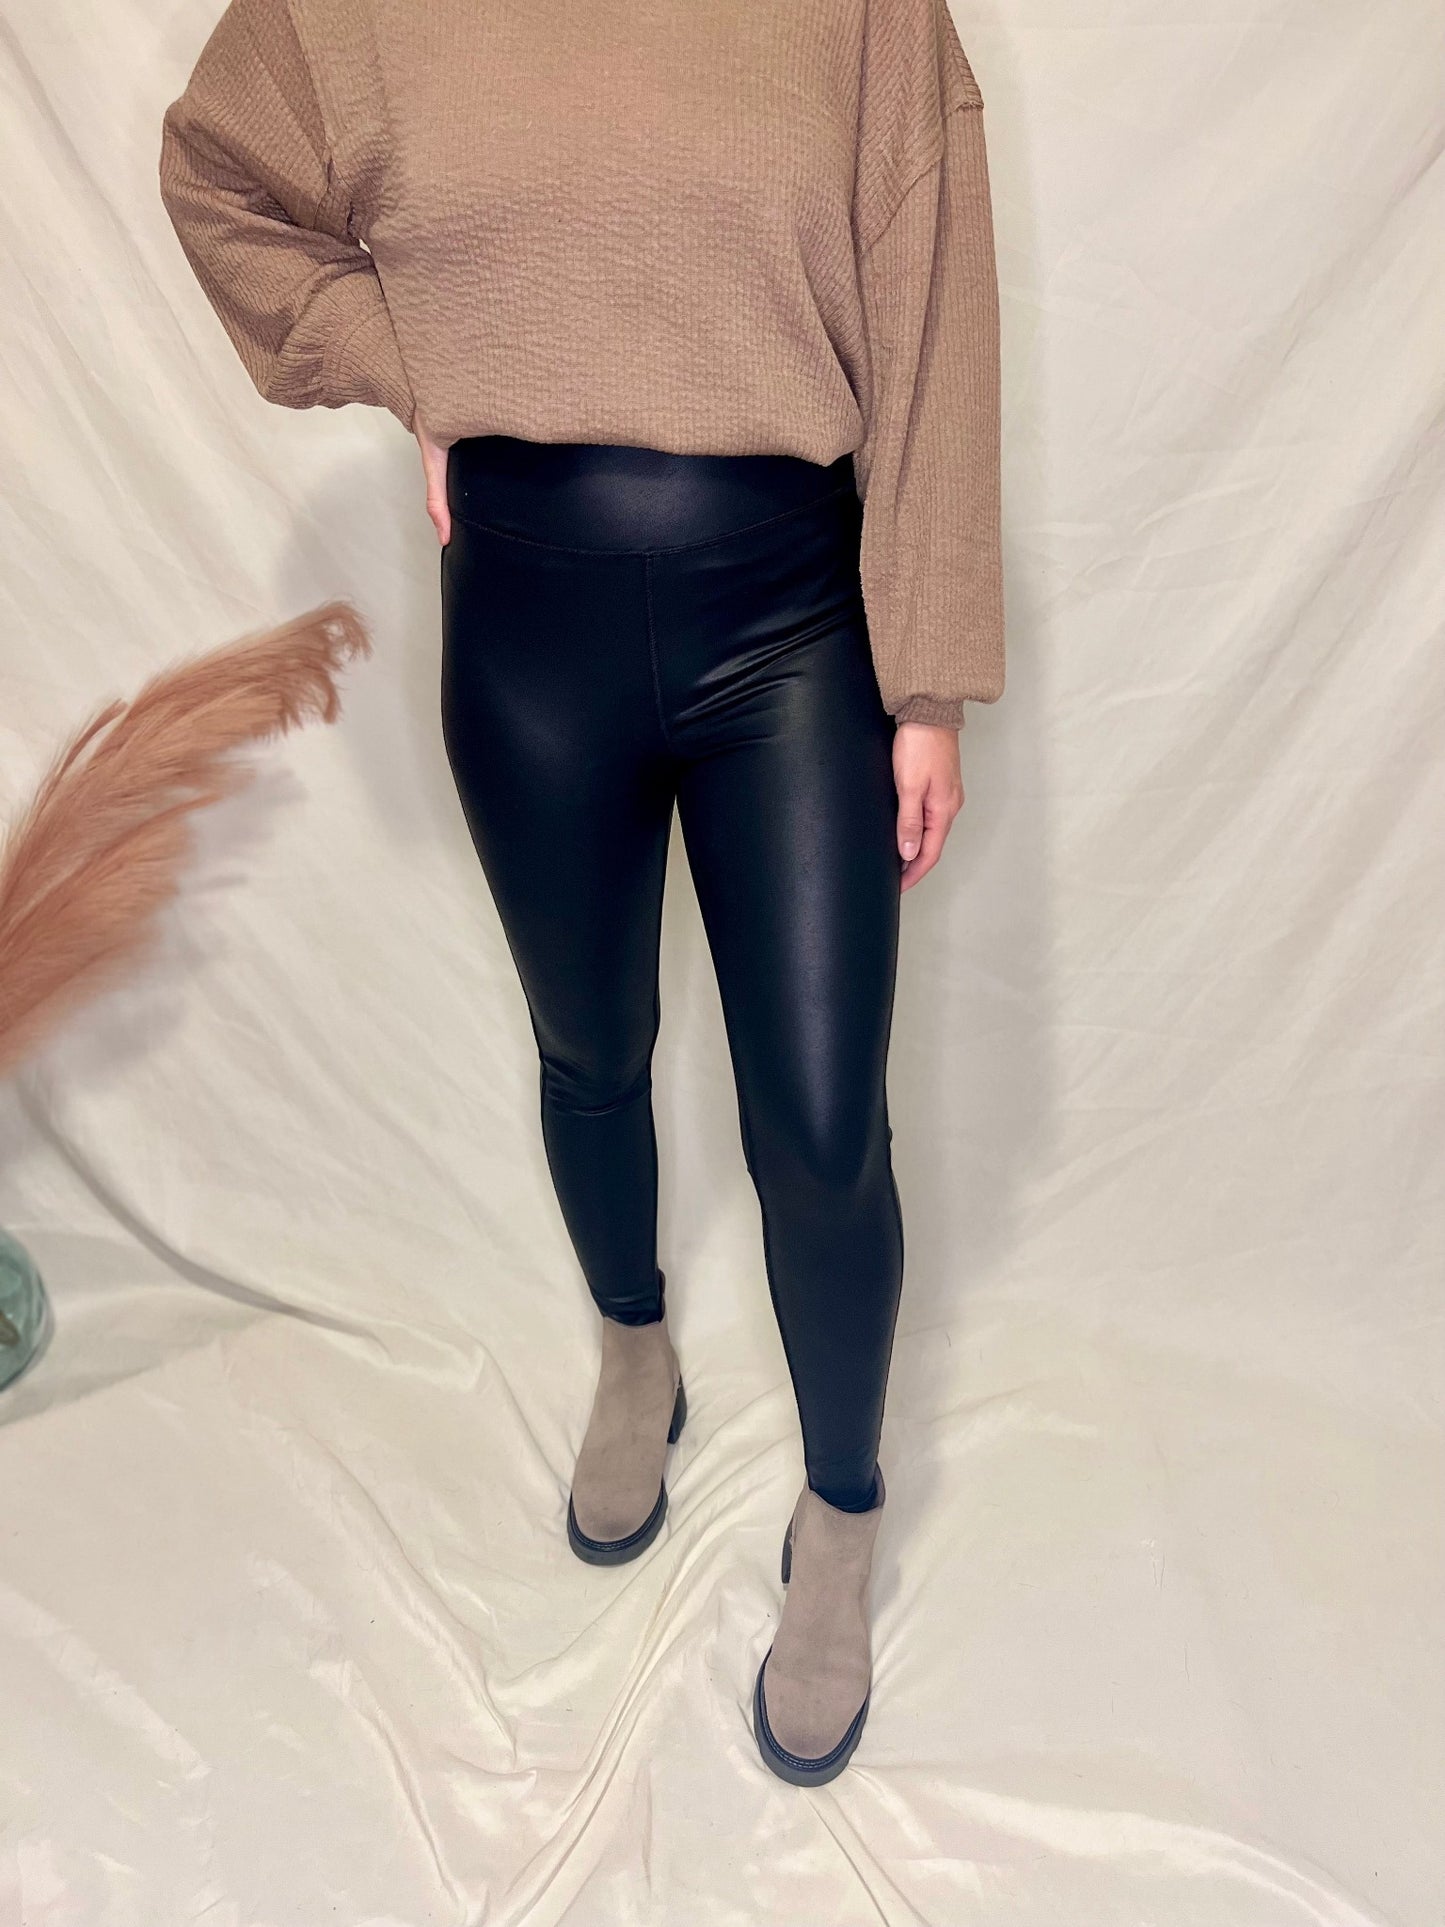 Friday Vibes Black Faux Leather Leggings